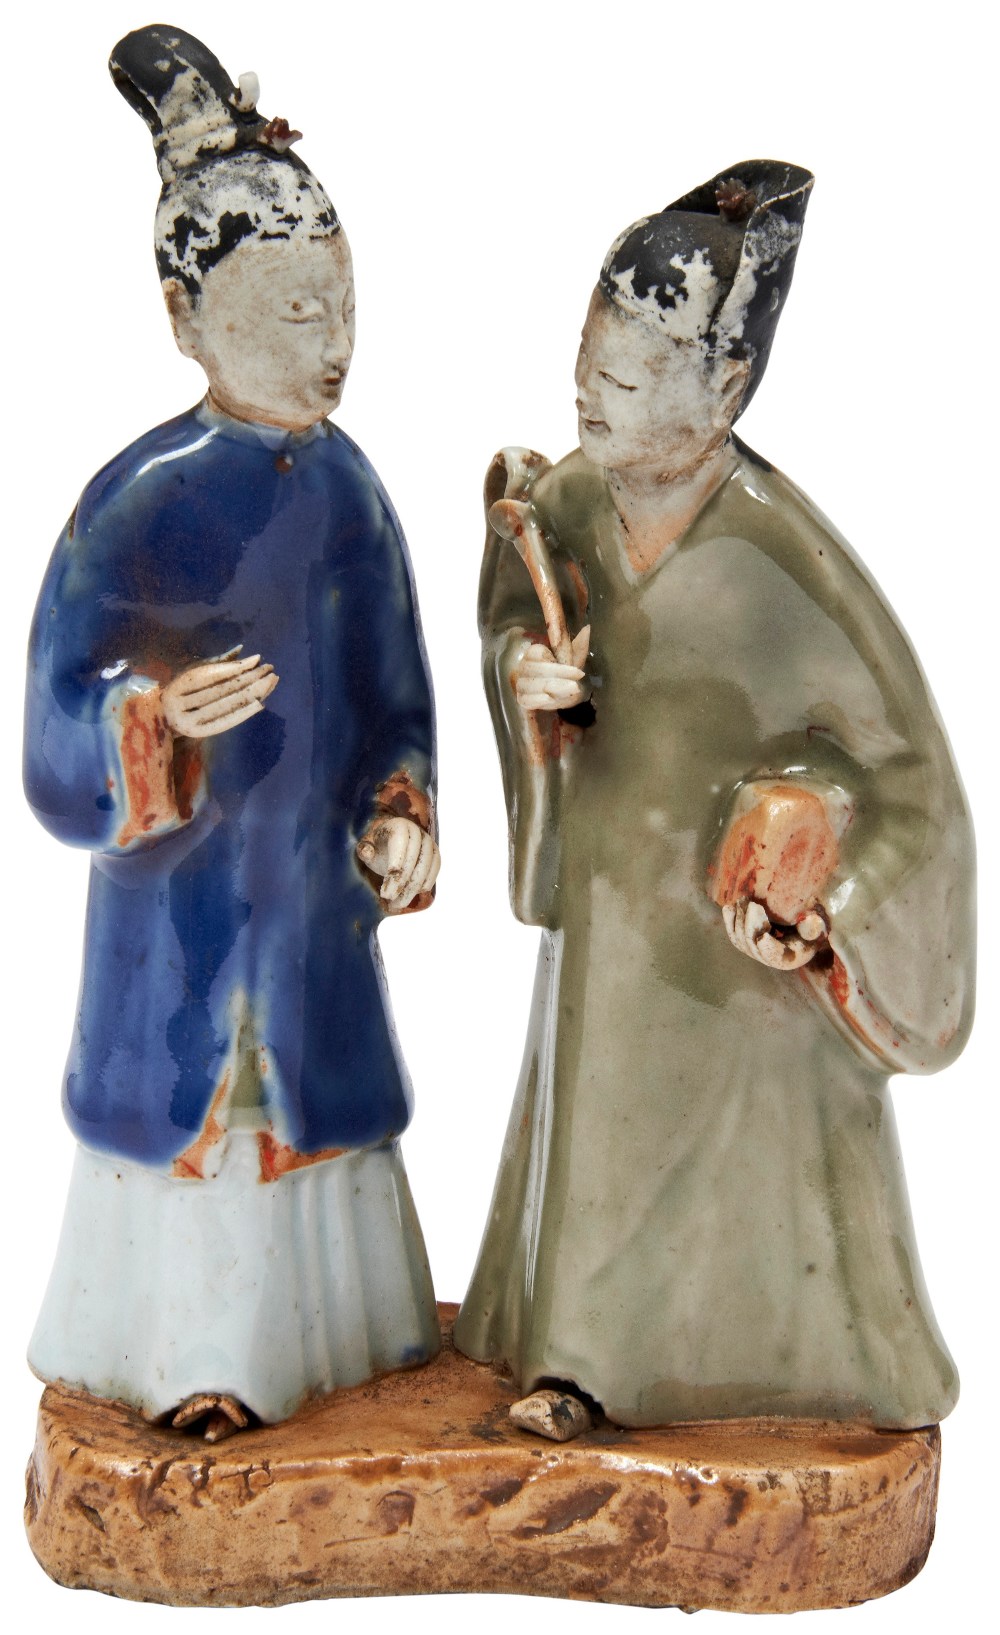 BLUE AND CELADON-GLAZED GROUP QIANLONG PERIOD (1736-1795) modelled standing wearing long flowing